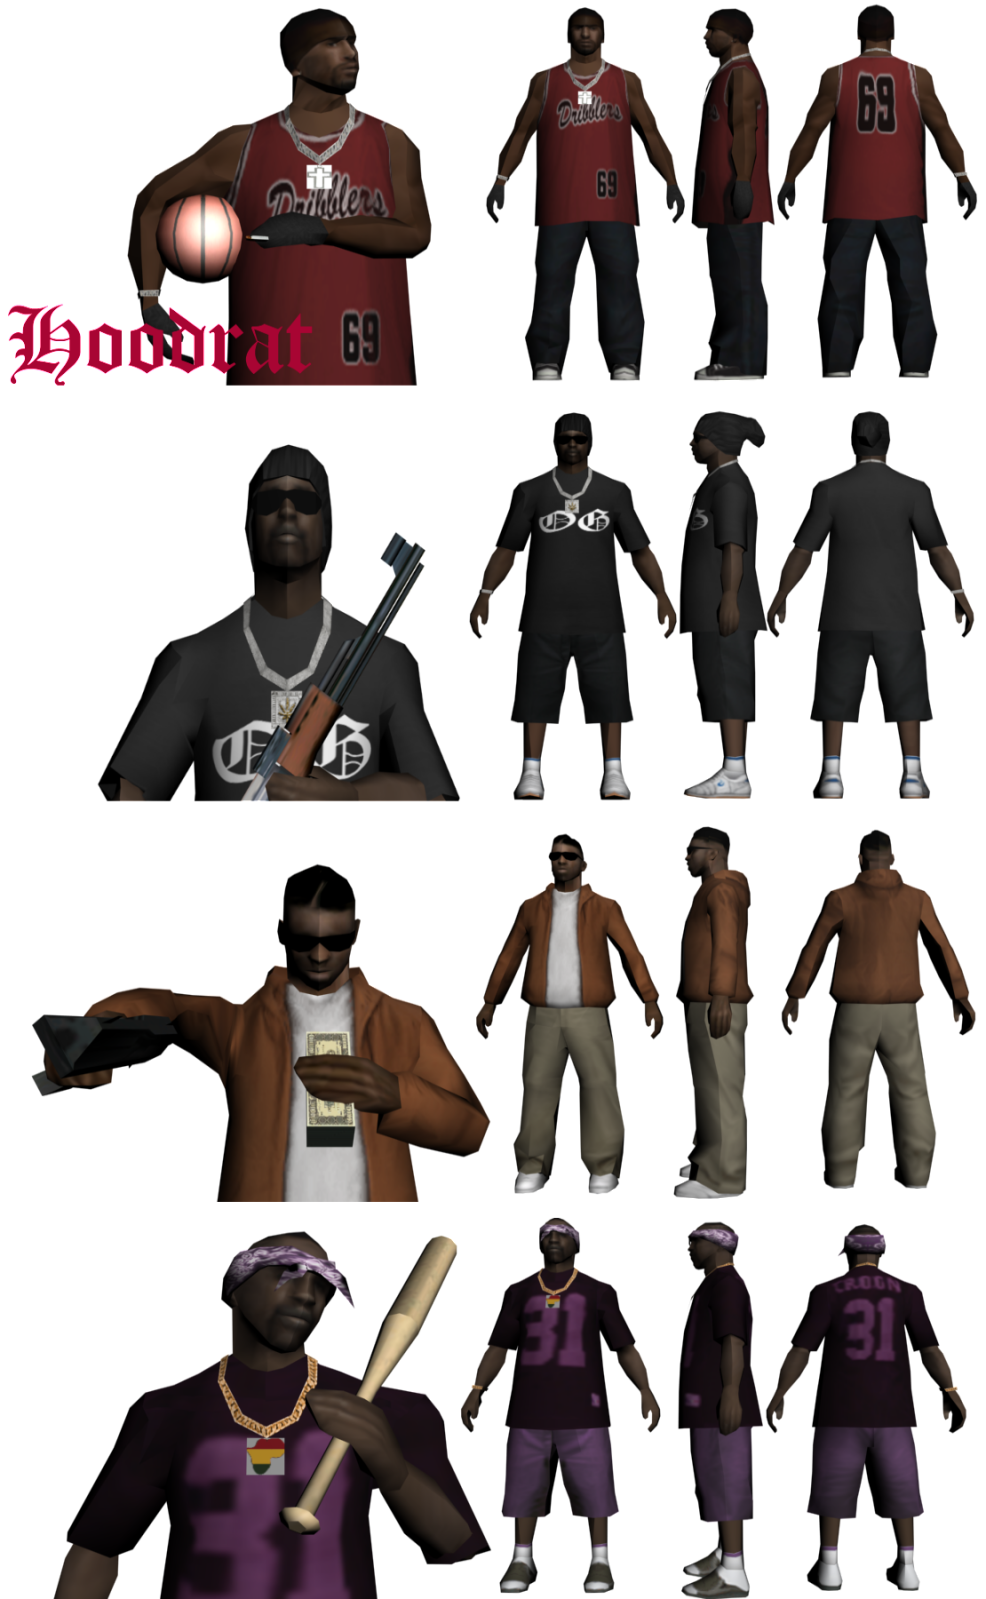 Modpack, afro-americain low poly skins. Zmmte0